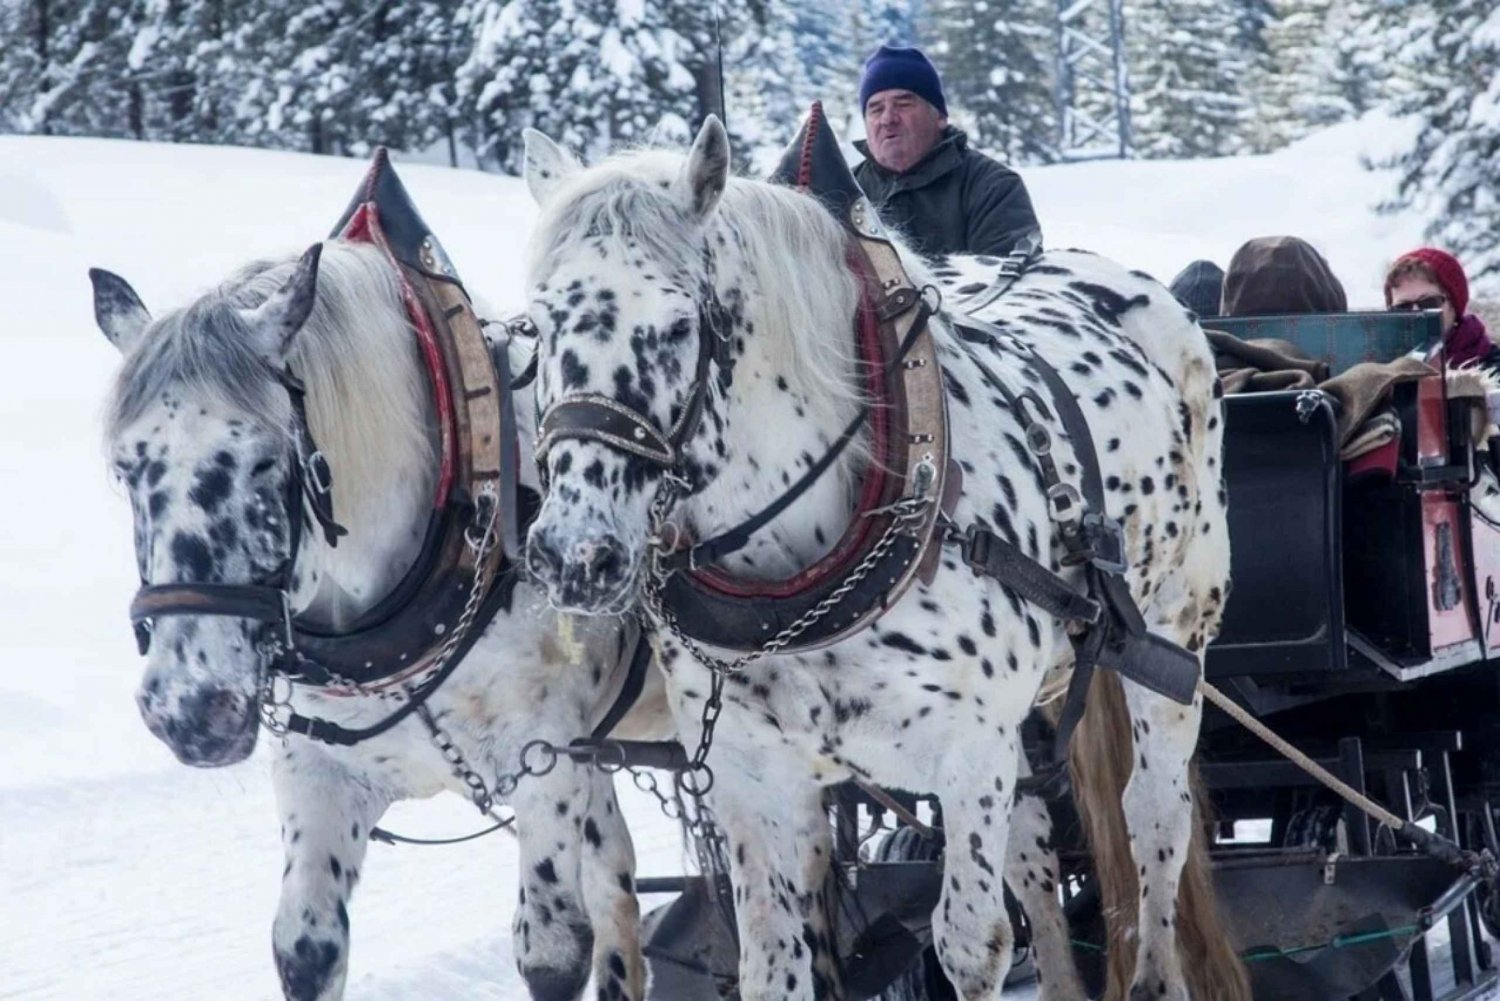 Zakopane and Sleigh Ride with Transfers and Lunch Option